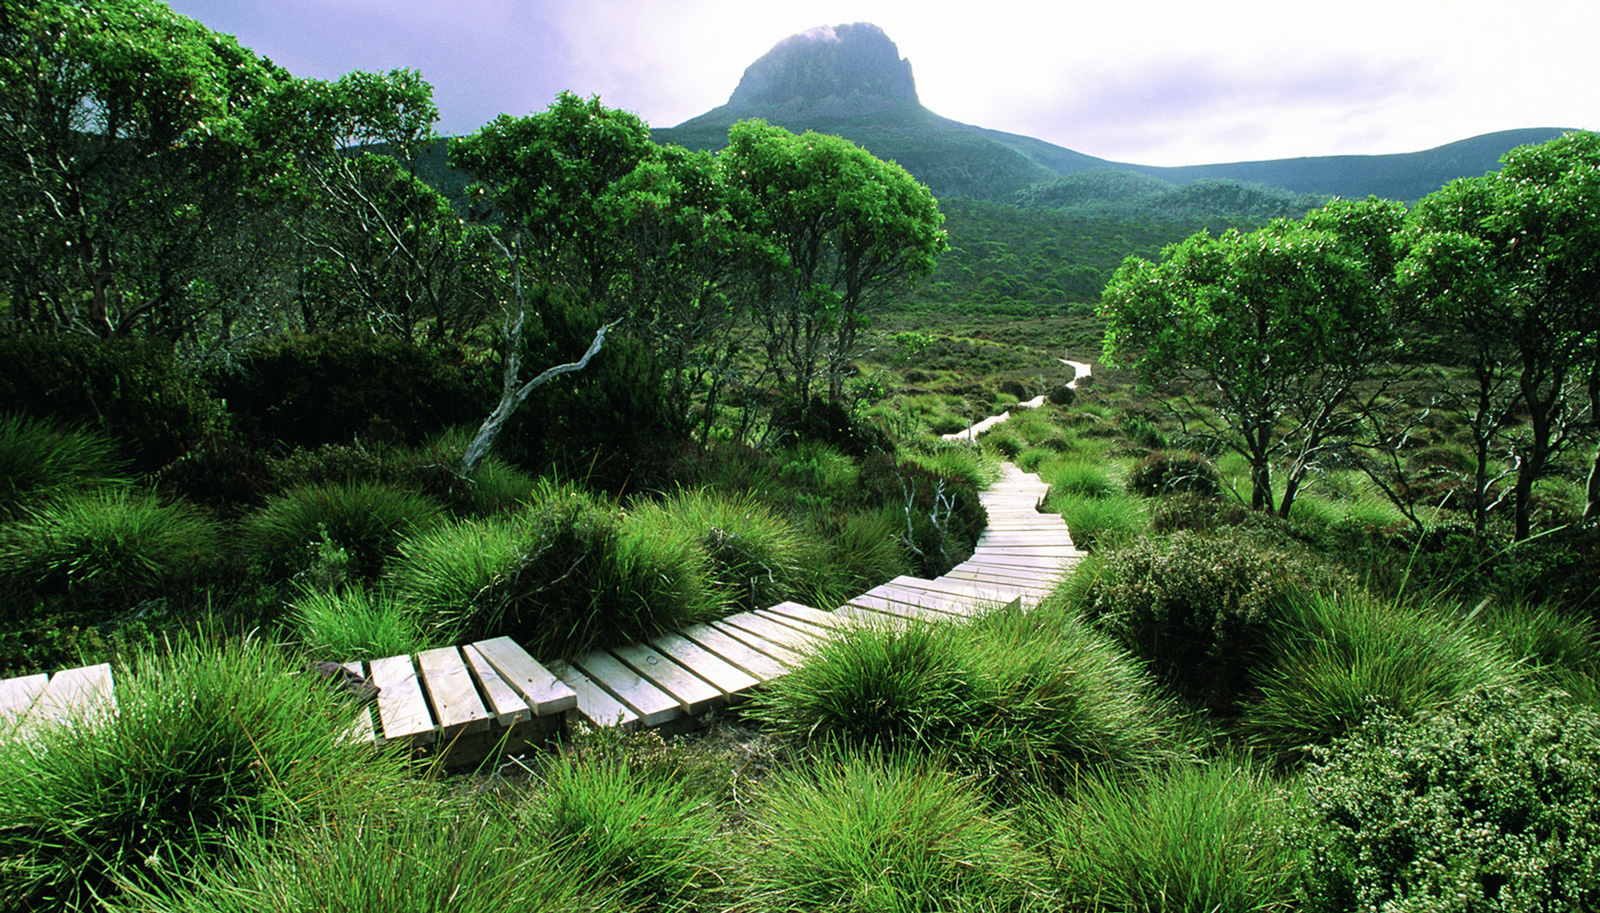 Boardwalk and views to Cradle Mountain - Photo credit: Great Walks of Australia